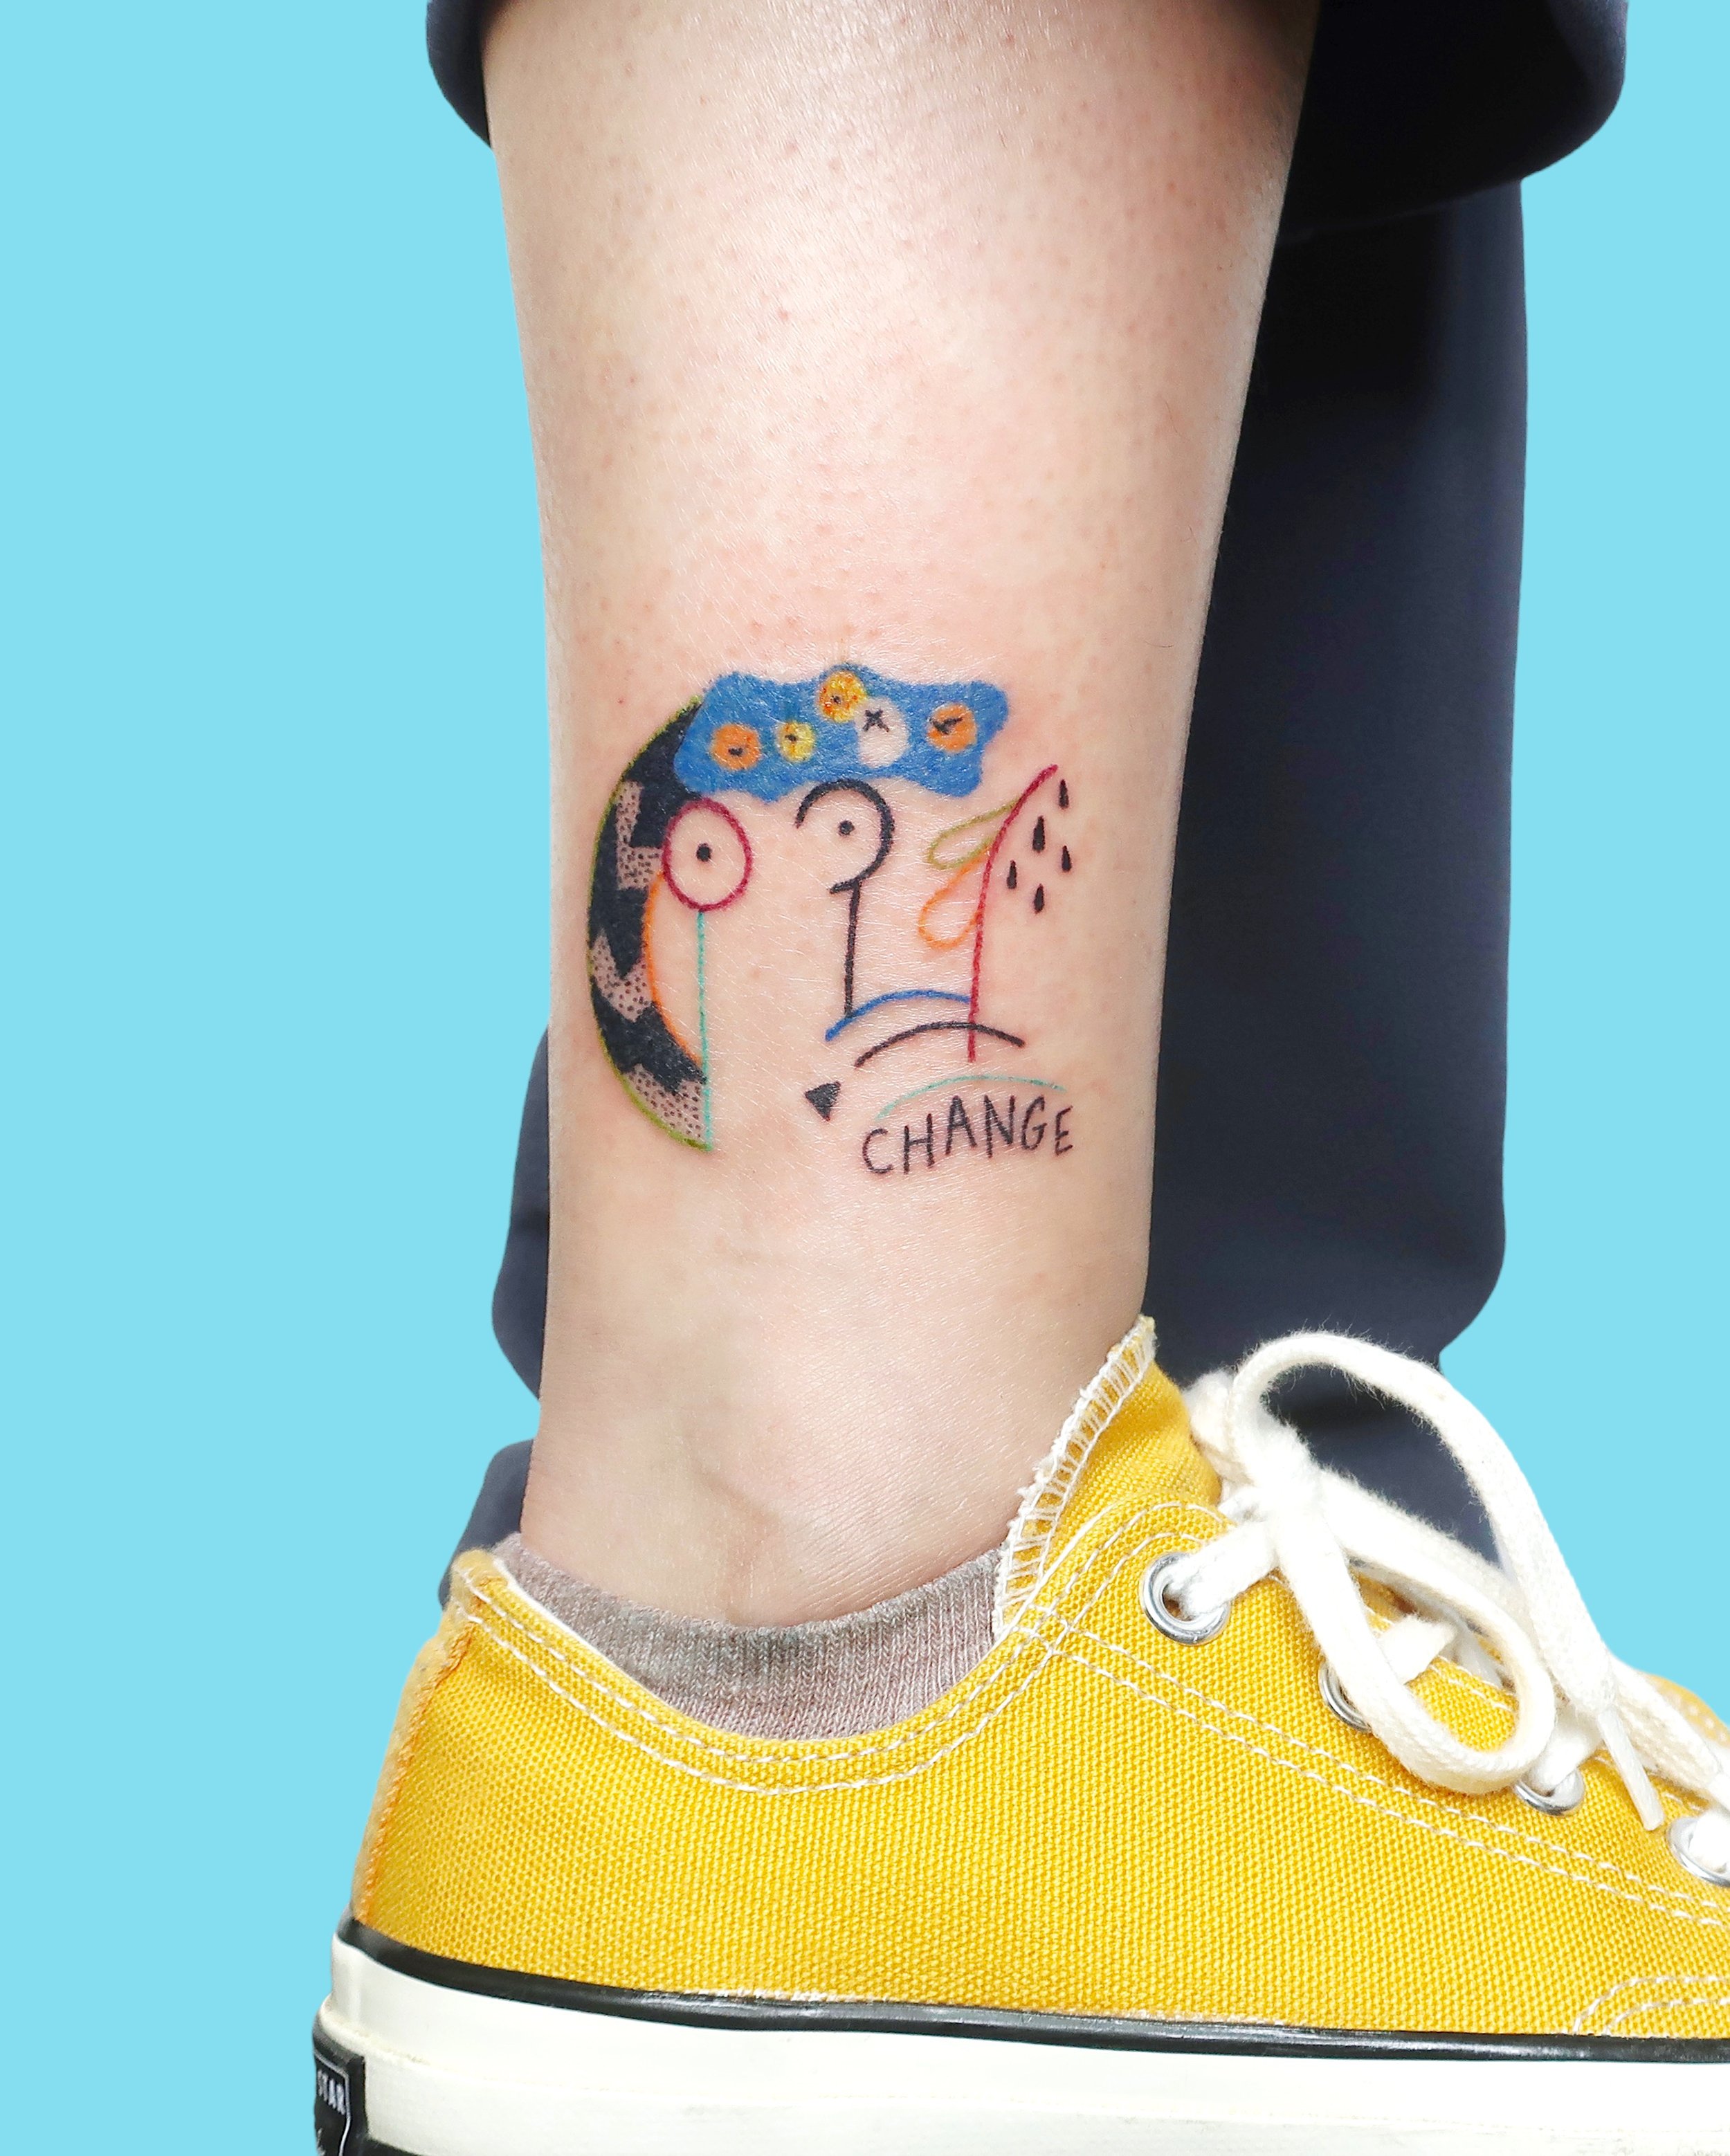 Tattoo of a matisse inspired drawing with a woman bust oranges and the word change by Madame Unikat.JPG